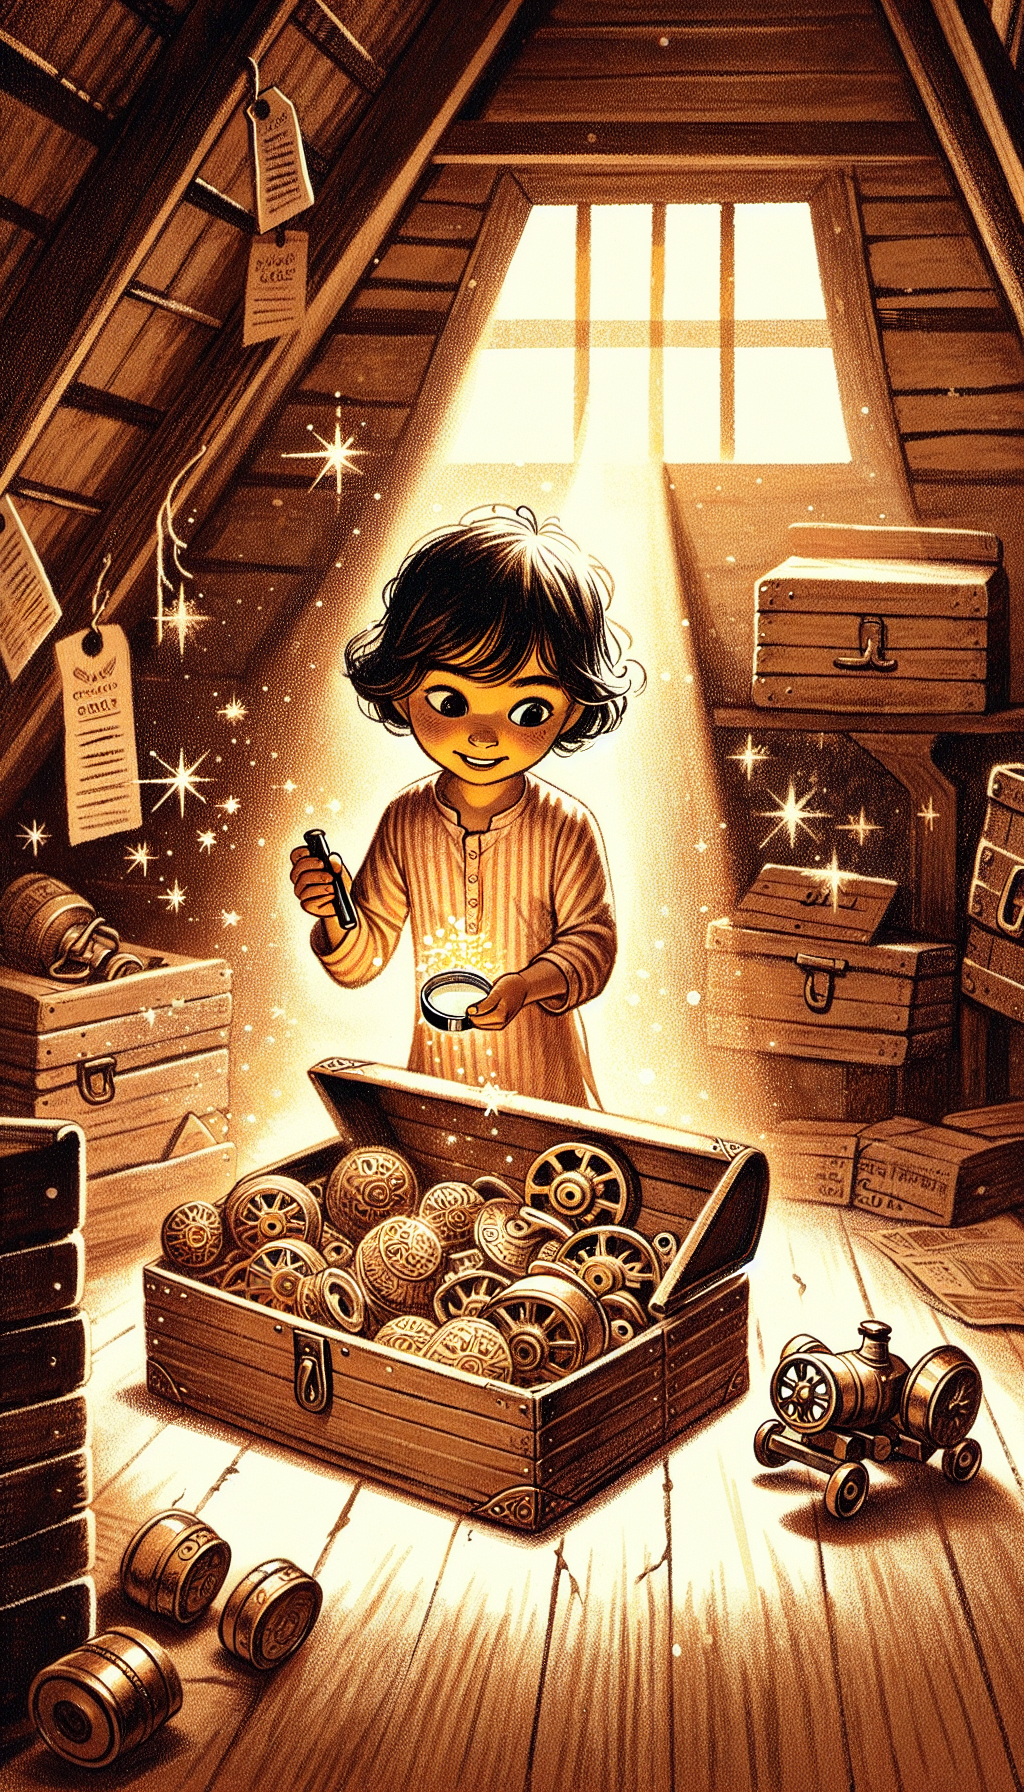 A sepia-toned illustration depicting a child-like figure with a magnifying glass, kneeling in an attic, dust particles dancing in a beam of light. The child excitedly uncovers a chest filled with pristine, shimmering antique cast iron toys, each with a price tag suggesting their high value, blending the excitement of discovery with the allure of antiquity and financial worth.